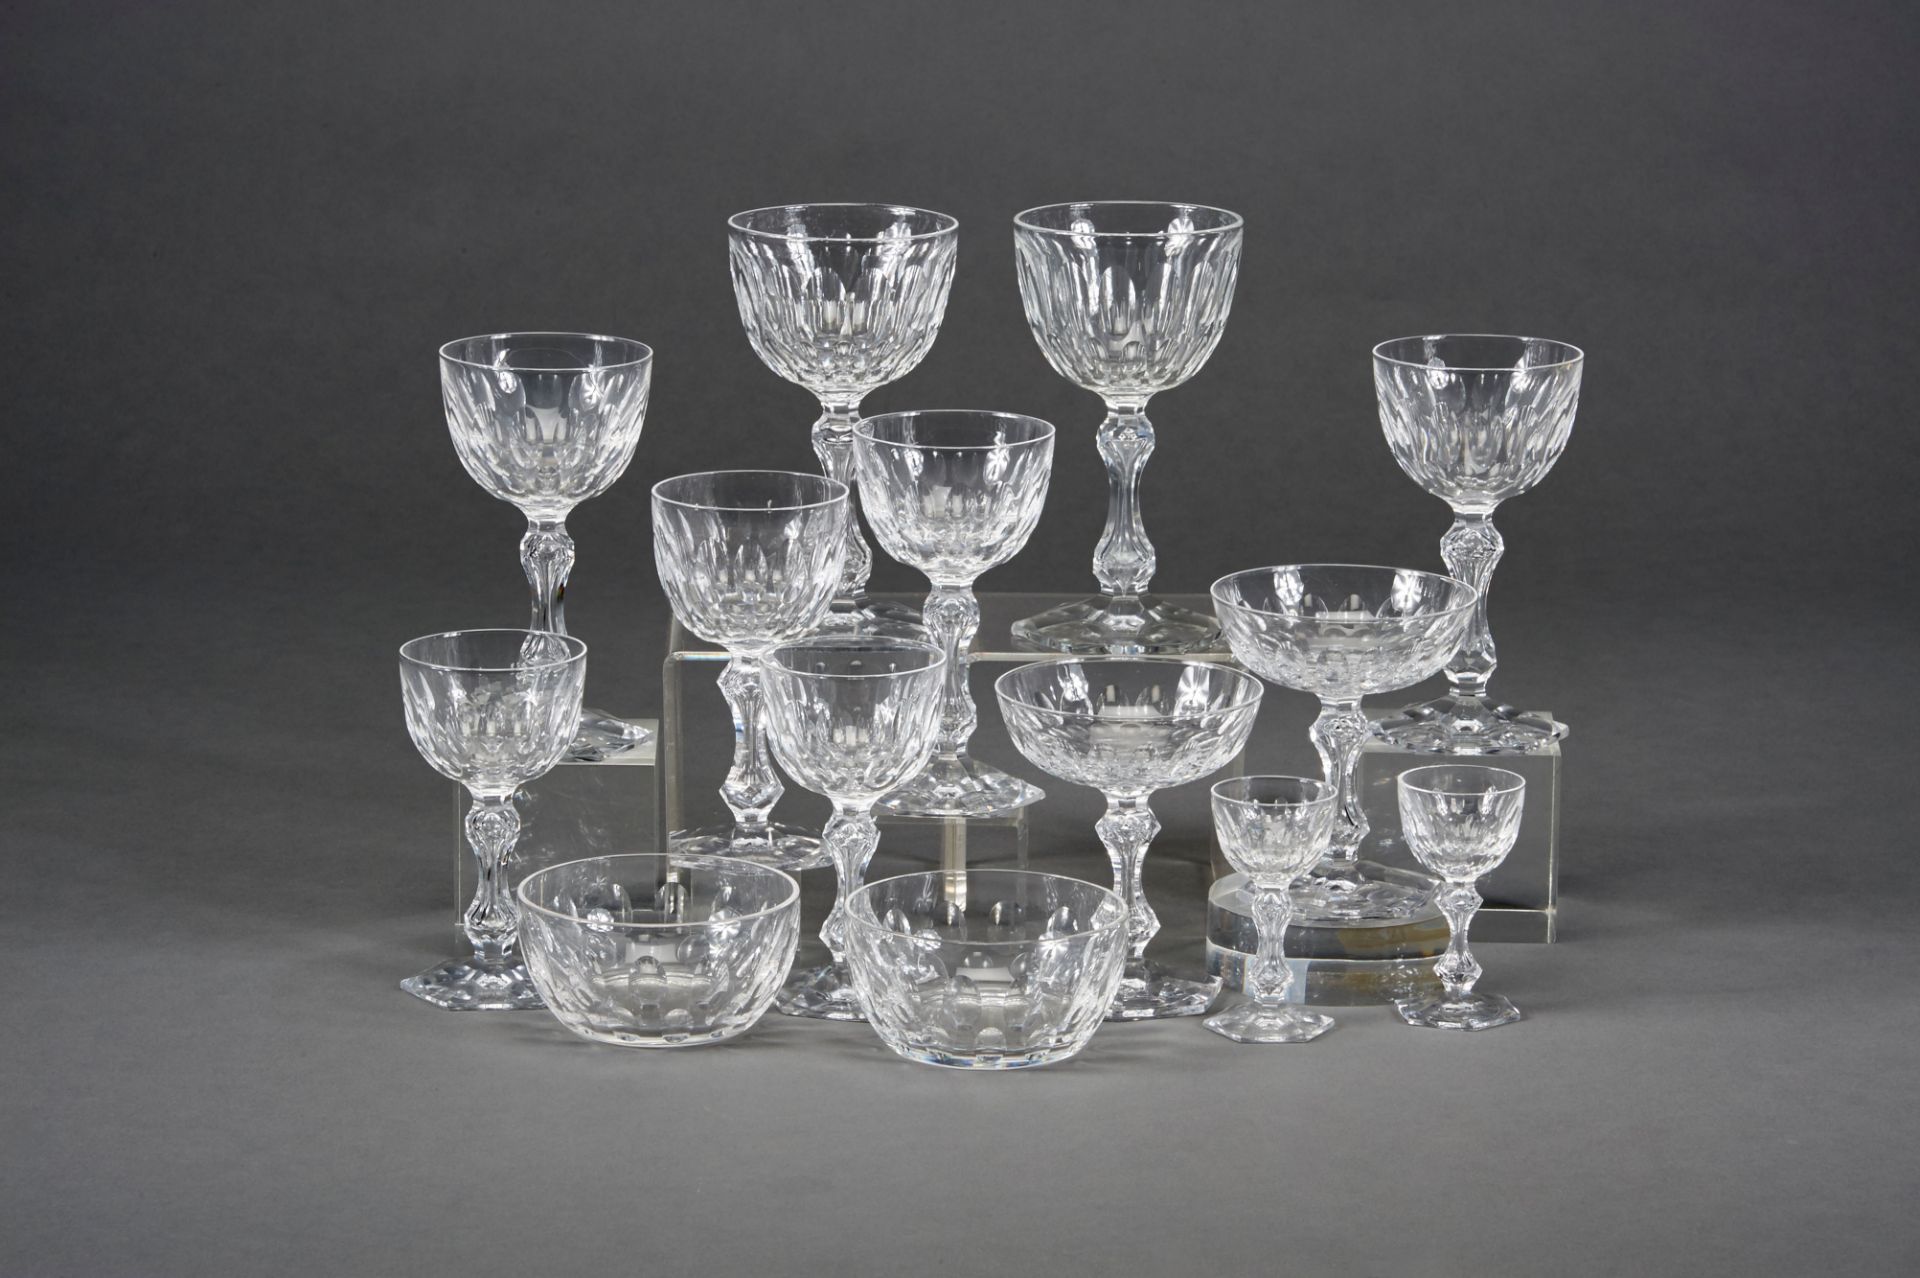 A Set of Stemmed Glasses for 18 people, crystal, composed of glasses of water, red wine, white wine,